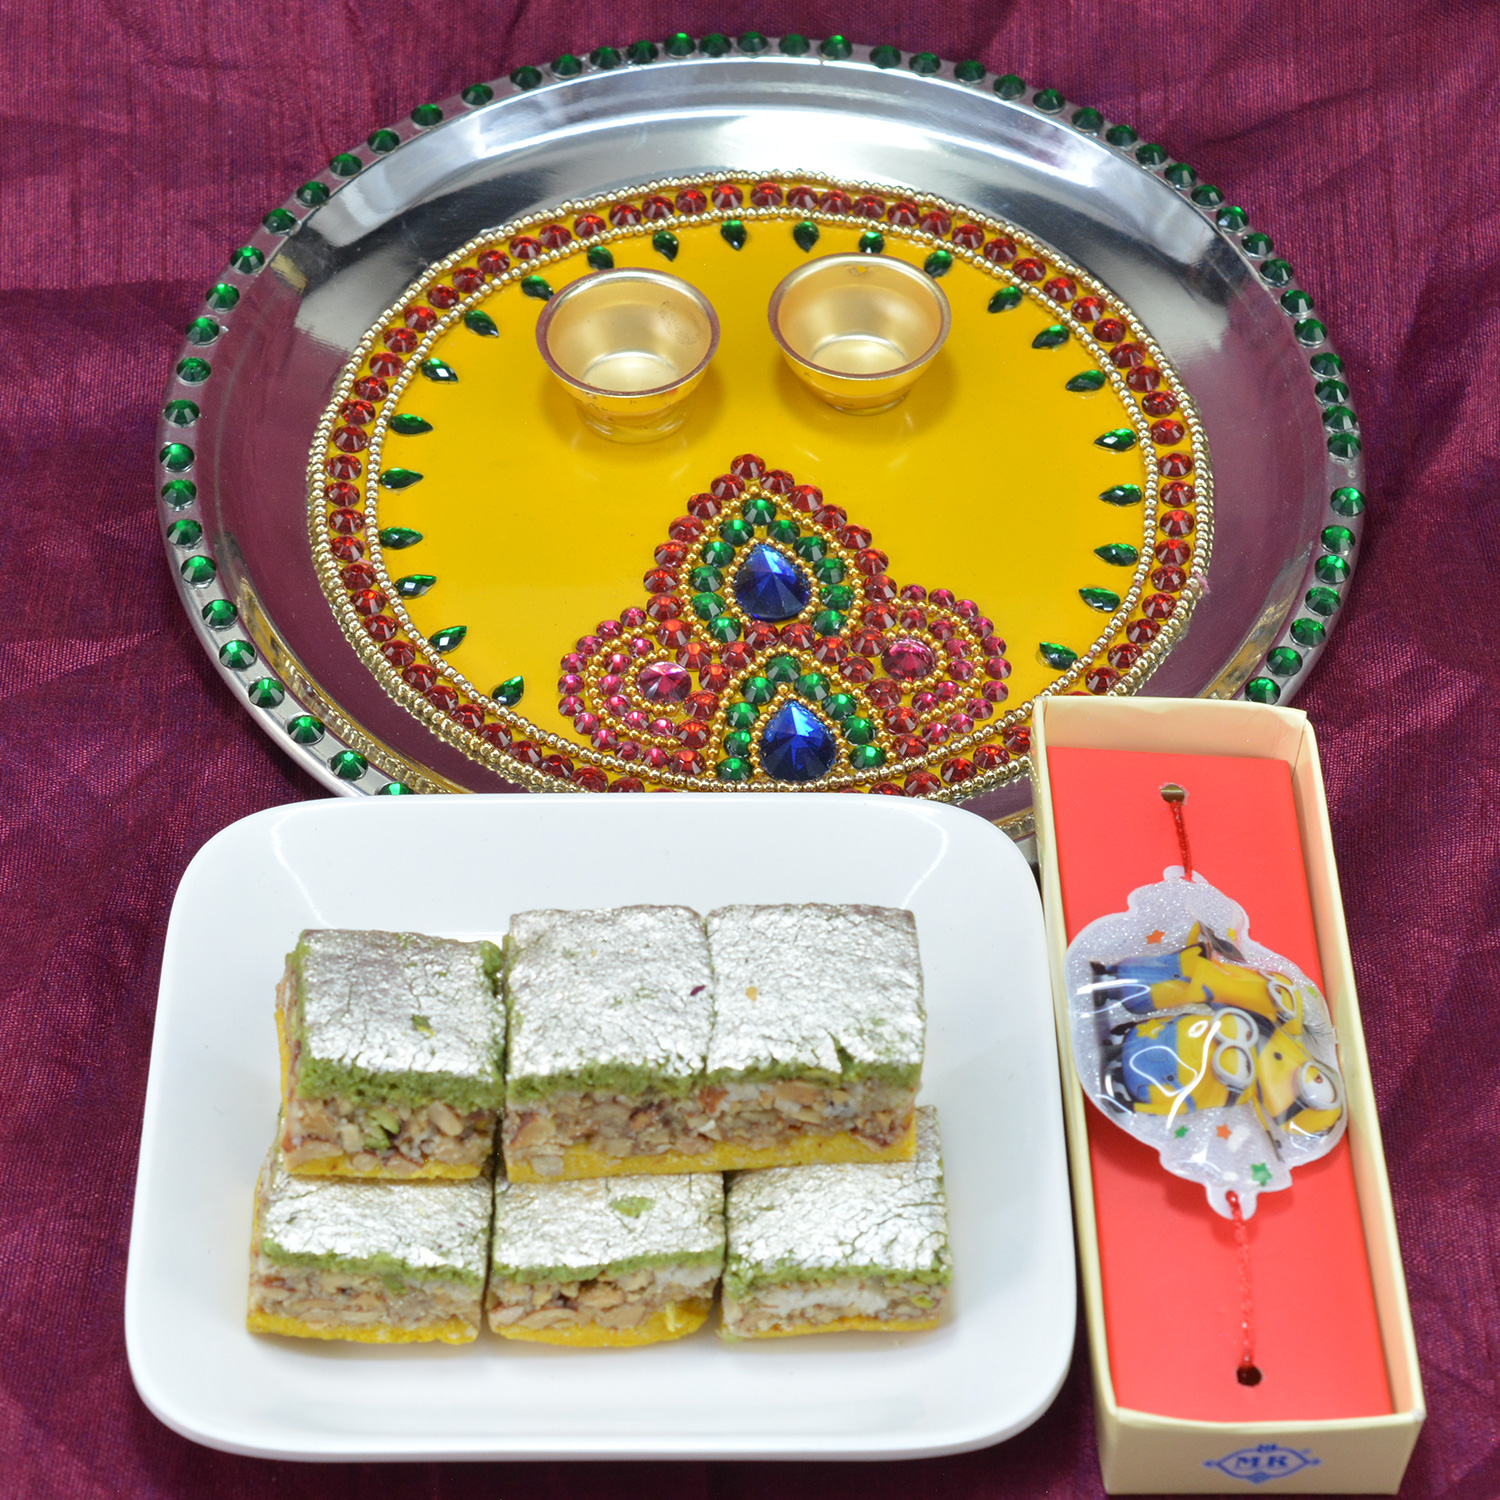 Amazing Colorful Beads Crafted Pooja Thali with Delicious Badam Pista Barfi along with Kids Rakhi